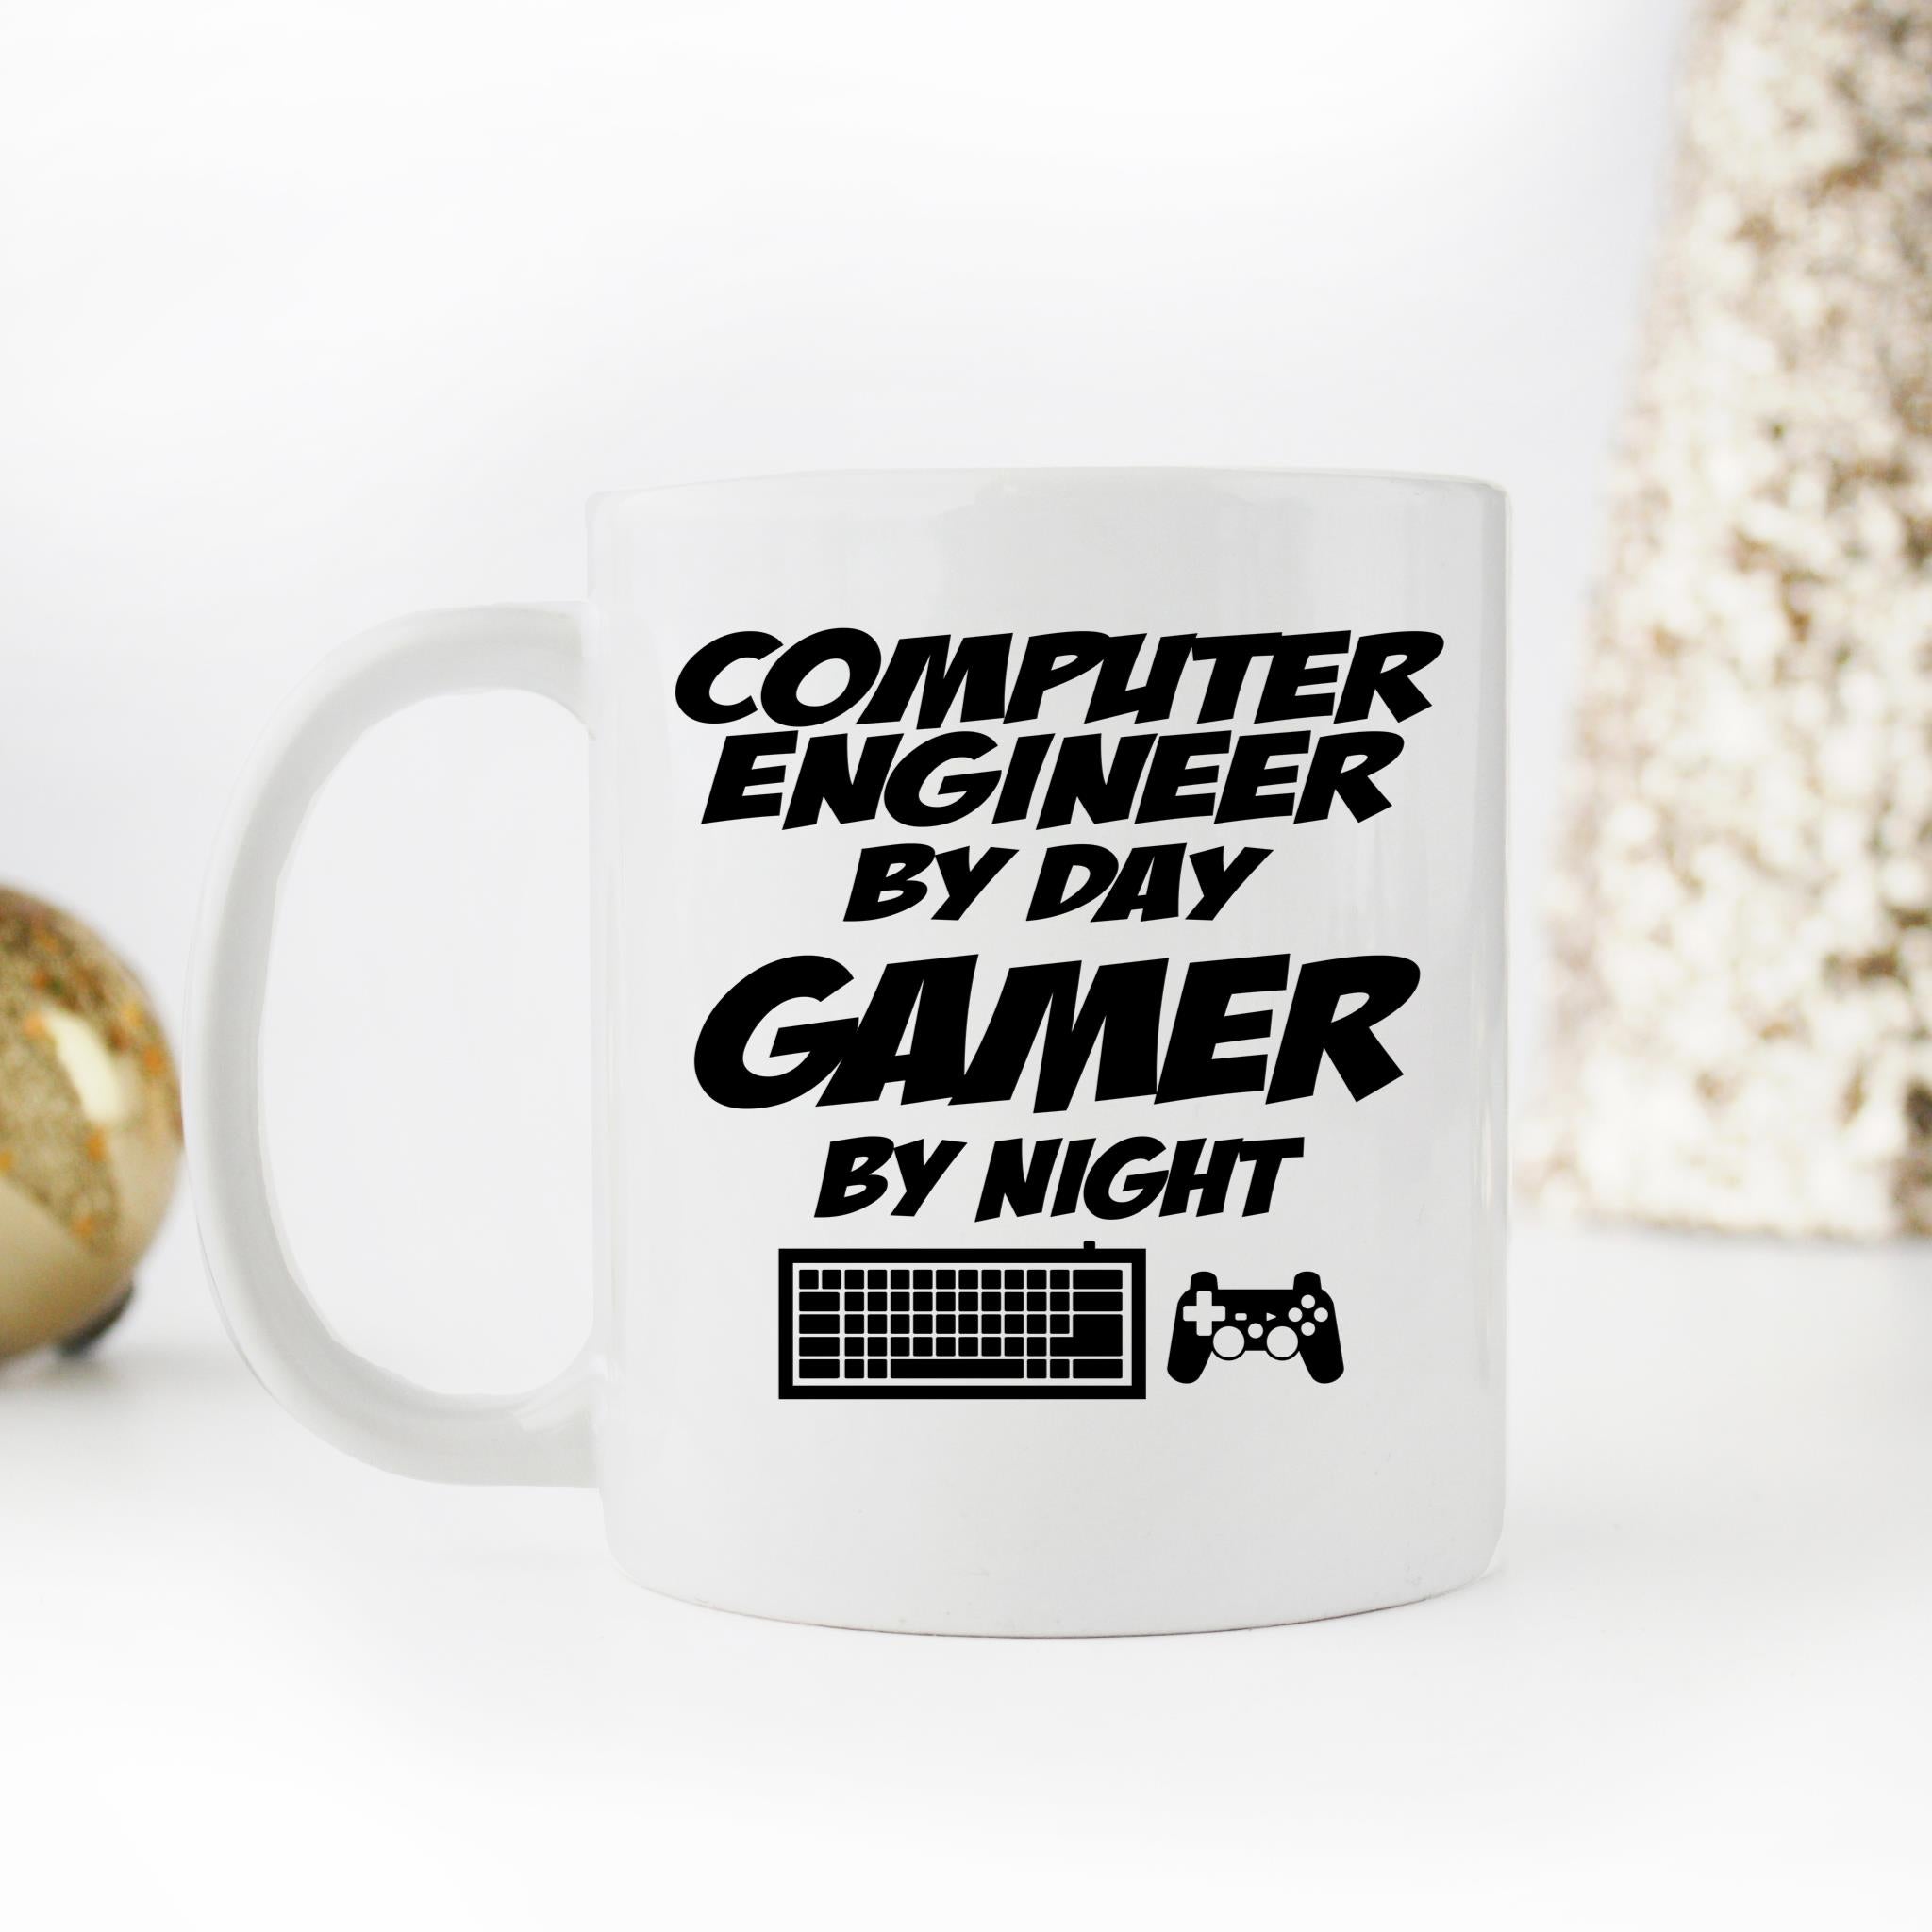 Skitongifts Funny Ceramic Novelty Coffee Mug Computer Engineer By Day Gamer By Night 67ImCZD